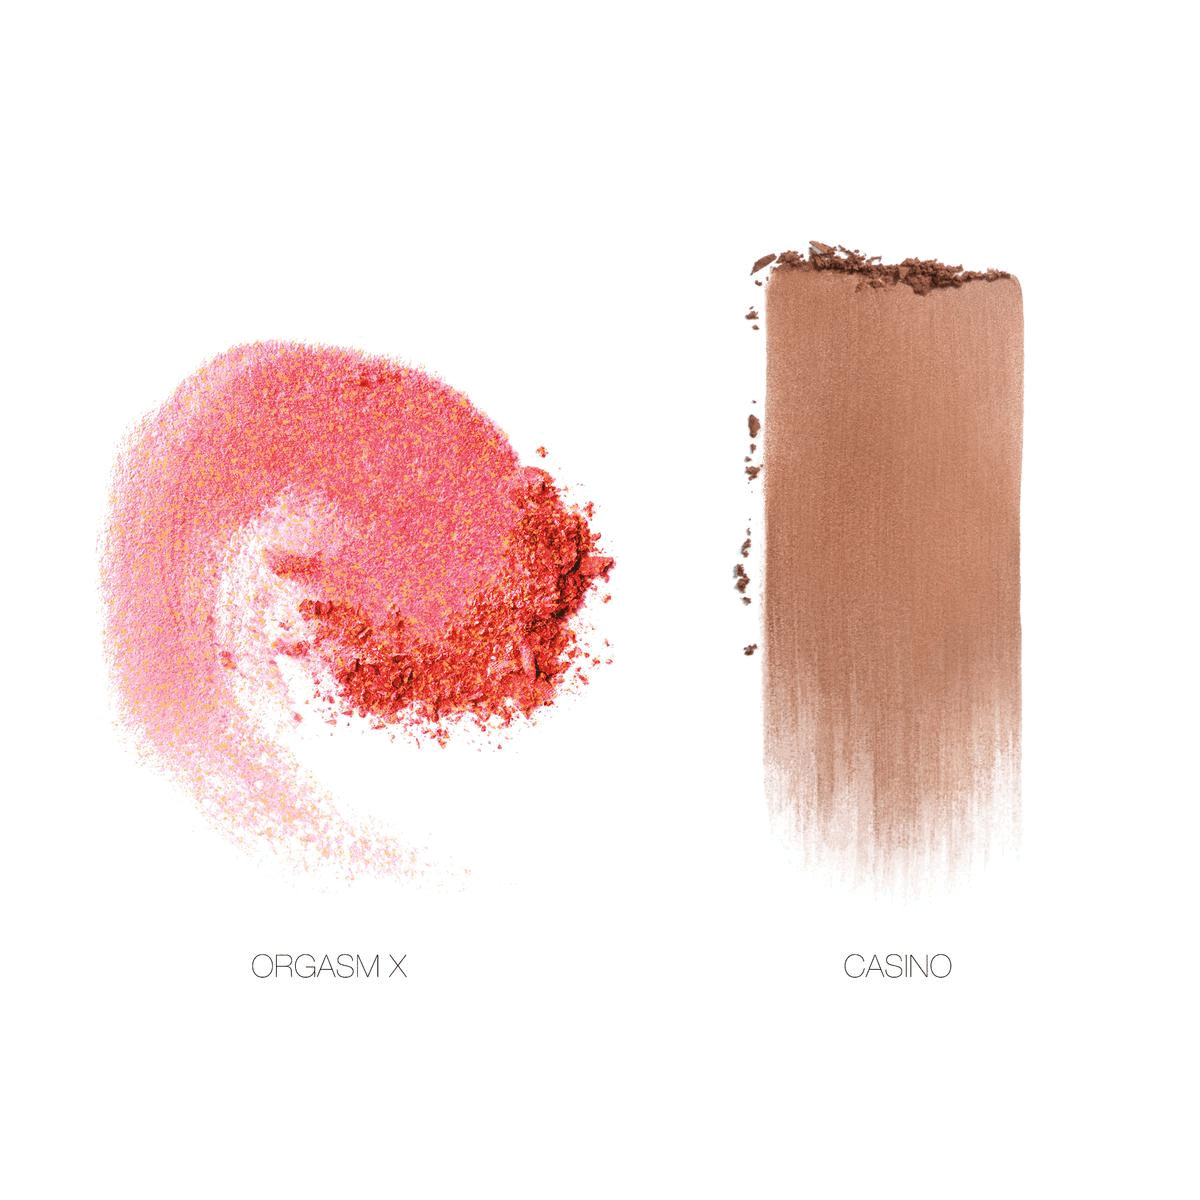 Product's swatches. Summer unrated blush/bronzer Duo. Model hand swatches